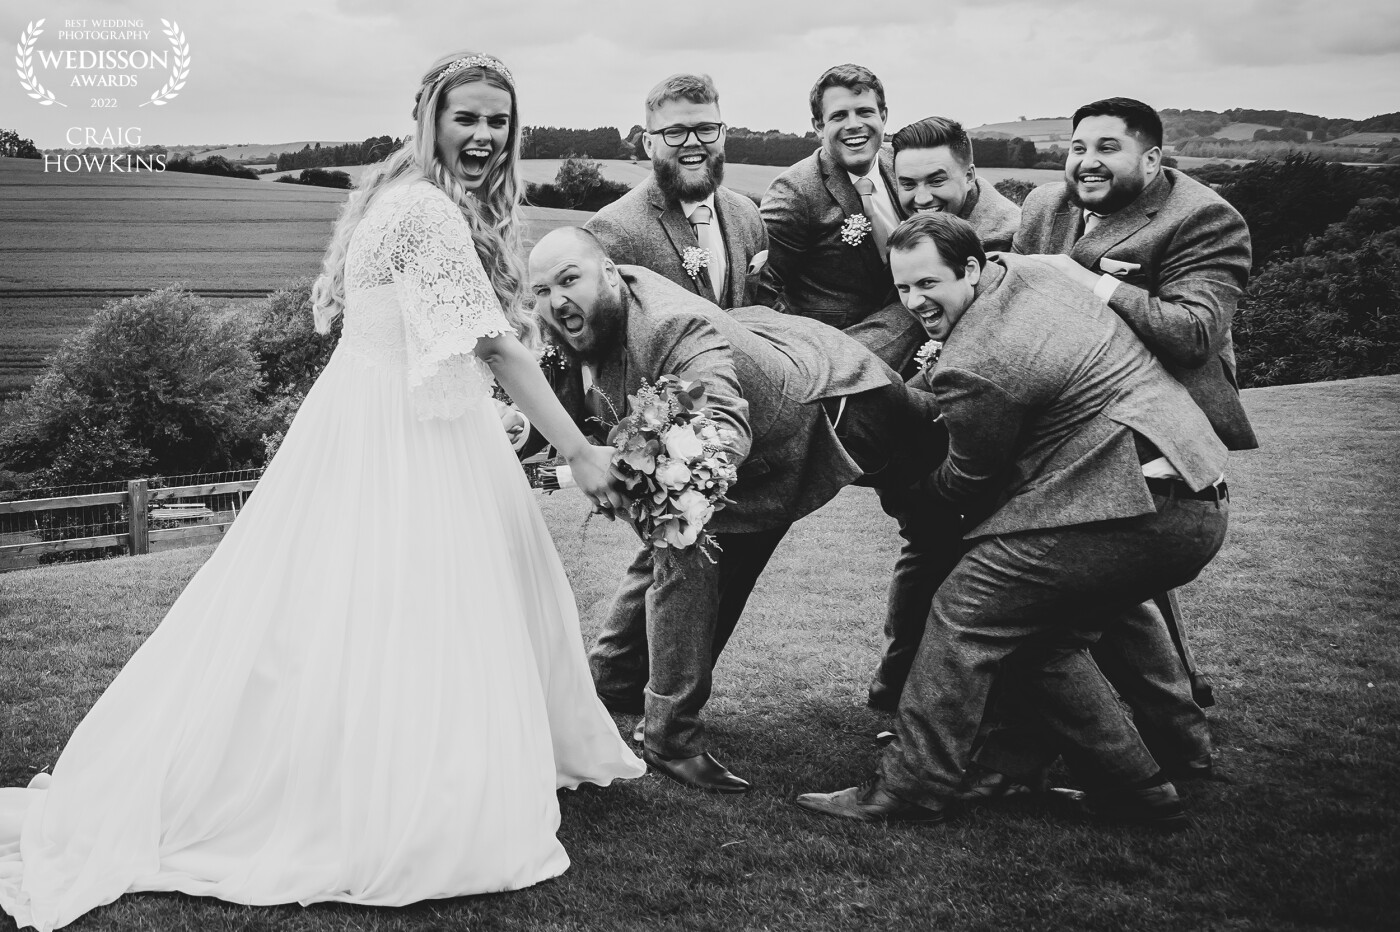 This picture says it all! I love it when I can have so much fun with my clients on their wedding. This shot was one of many fun times during the wedding day. It was great to get this photo of the groomsmen taking back their friend. Sometimes is hard to let go!!